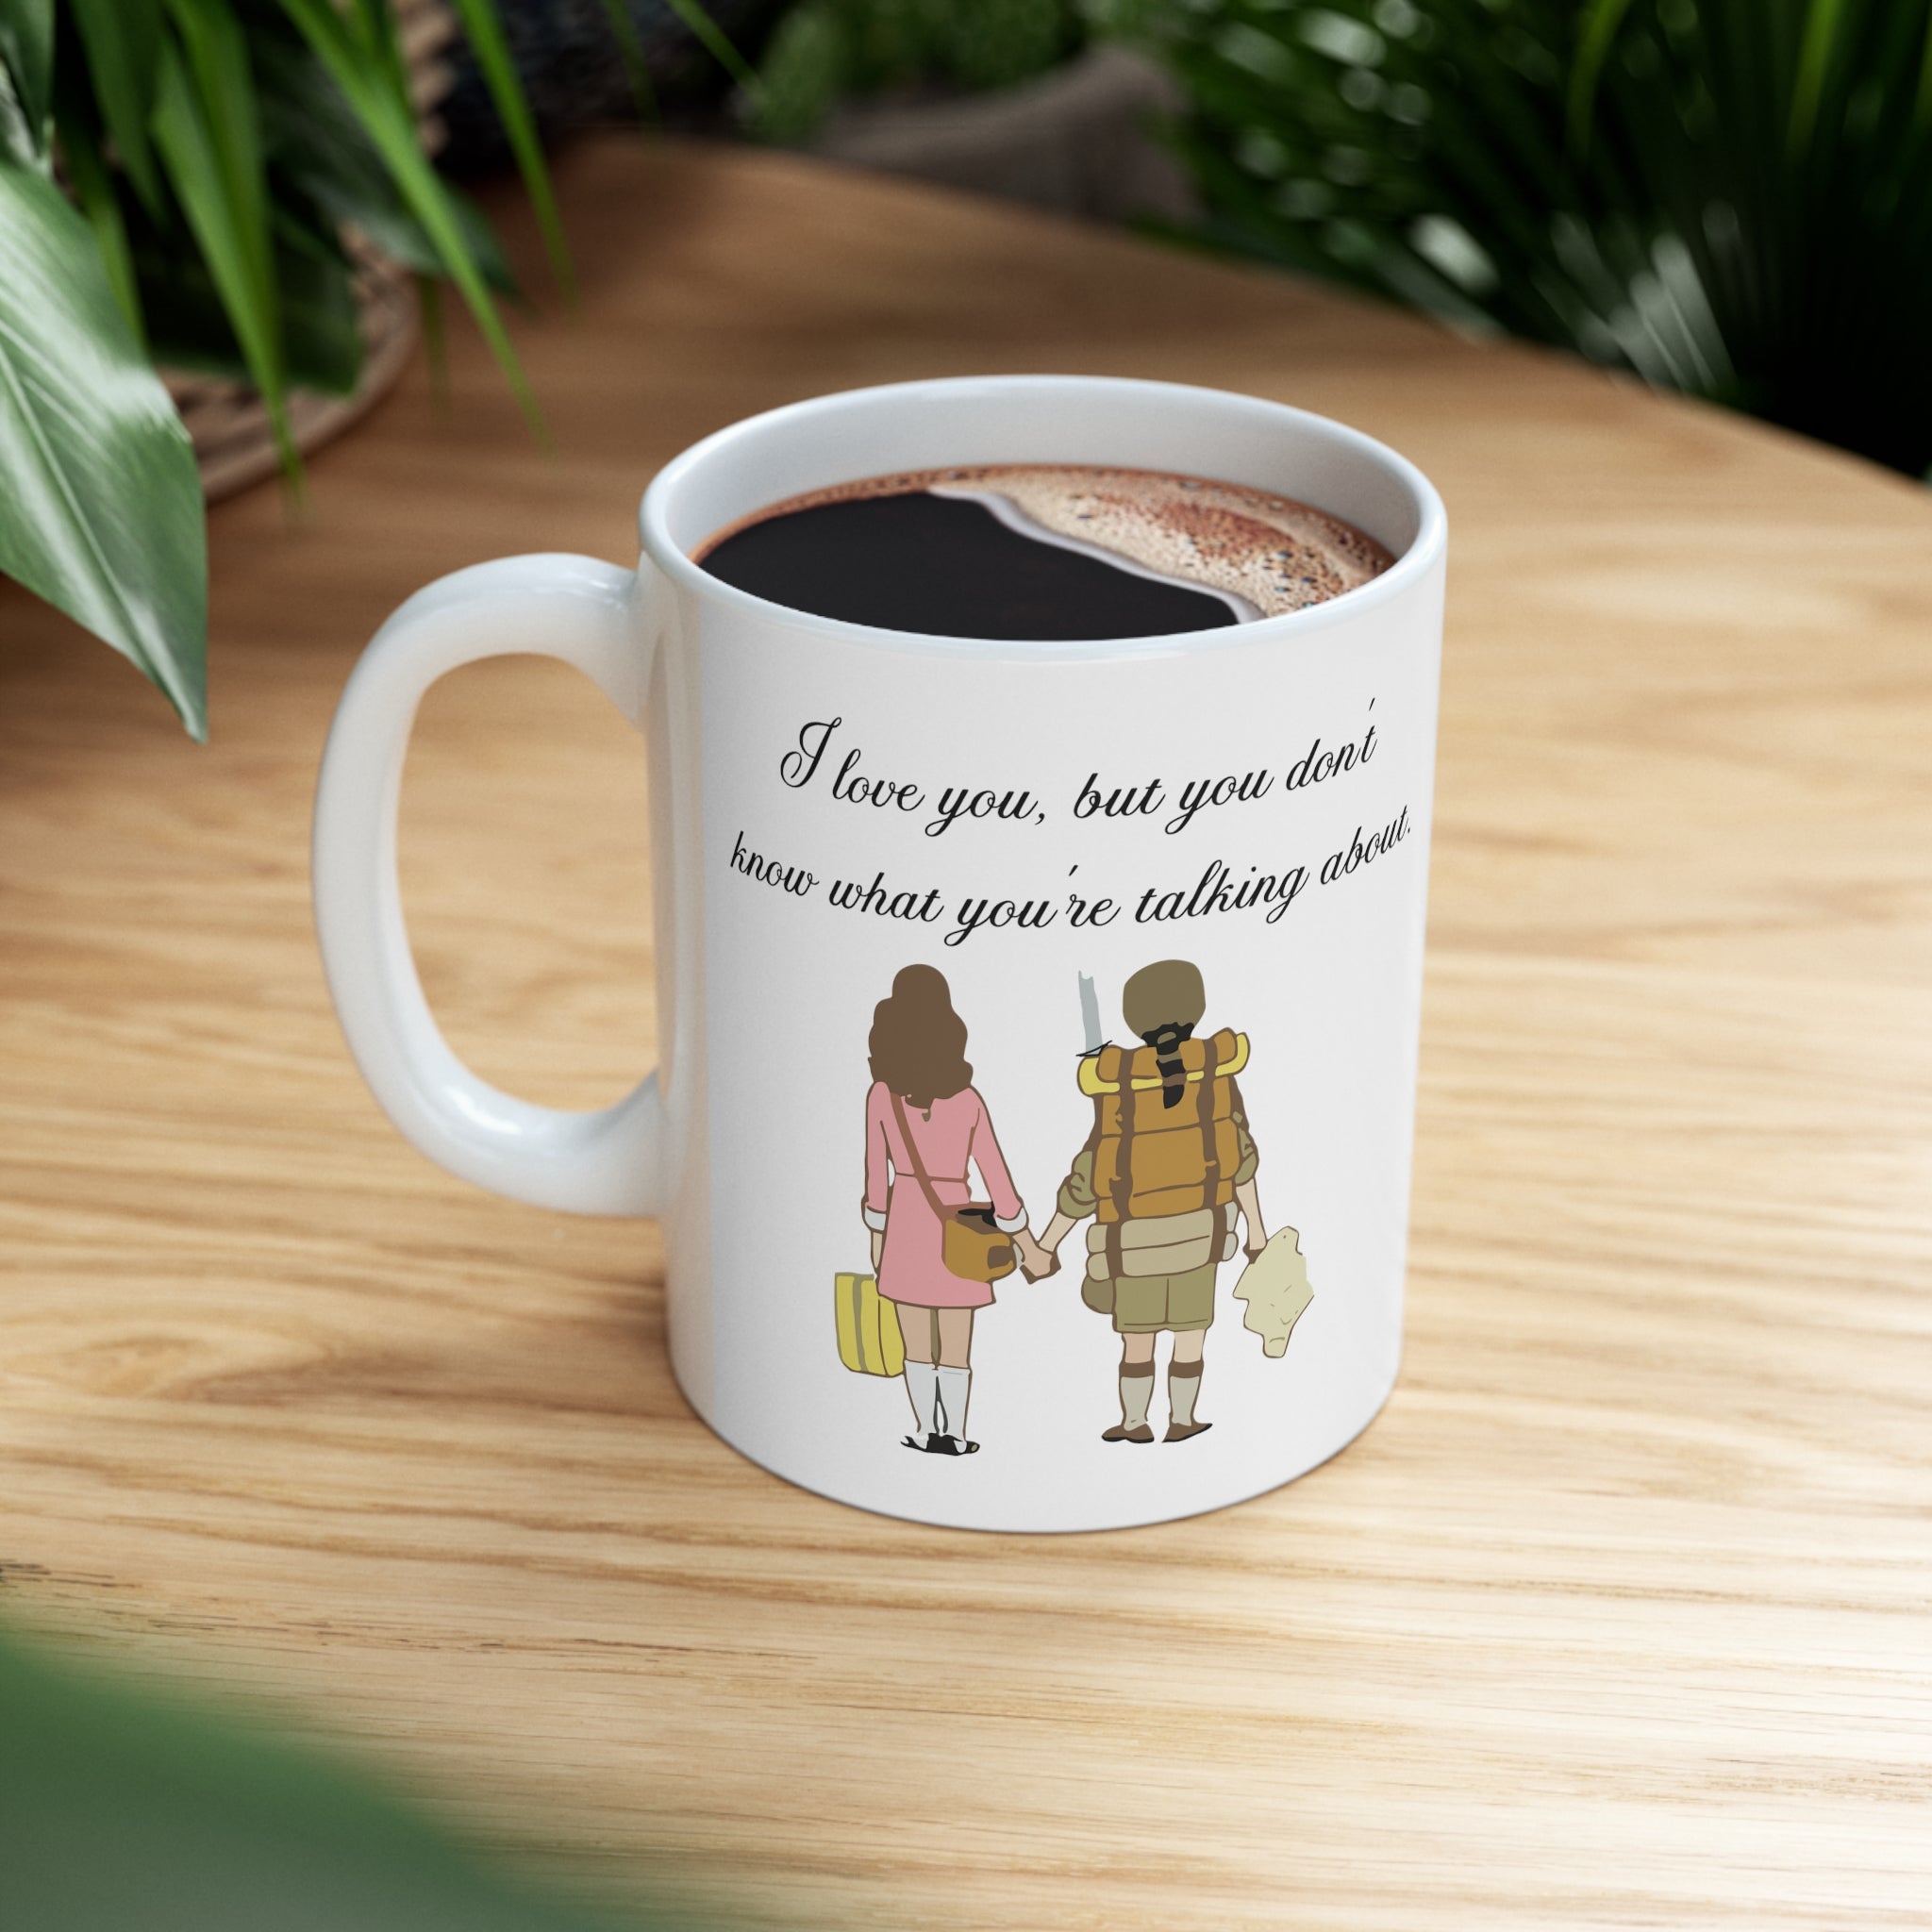 I love you, but you don't know what you're talking about. Moonrise Kingdom - Mug